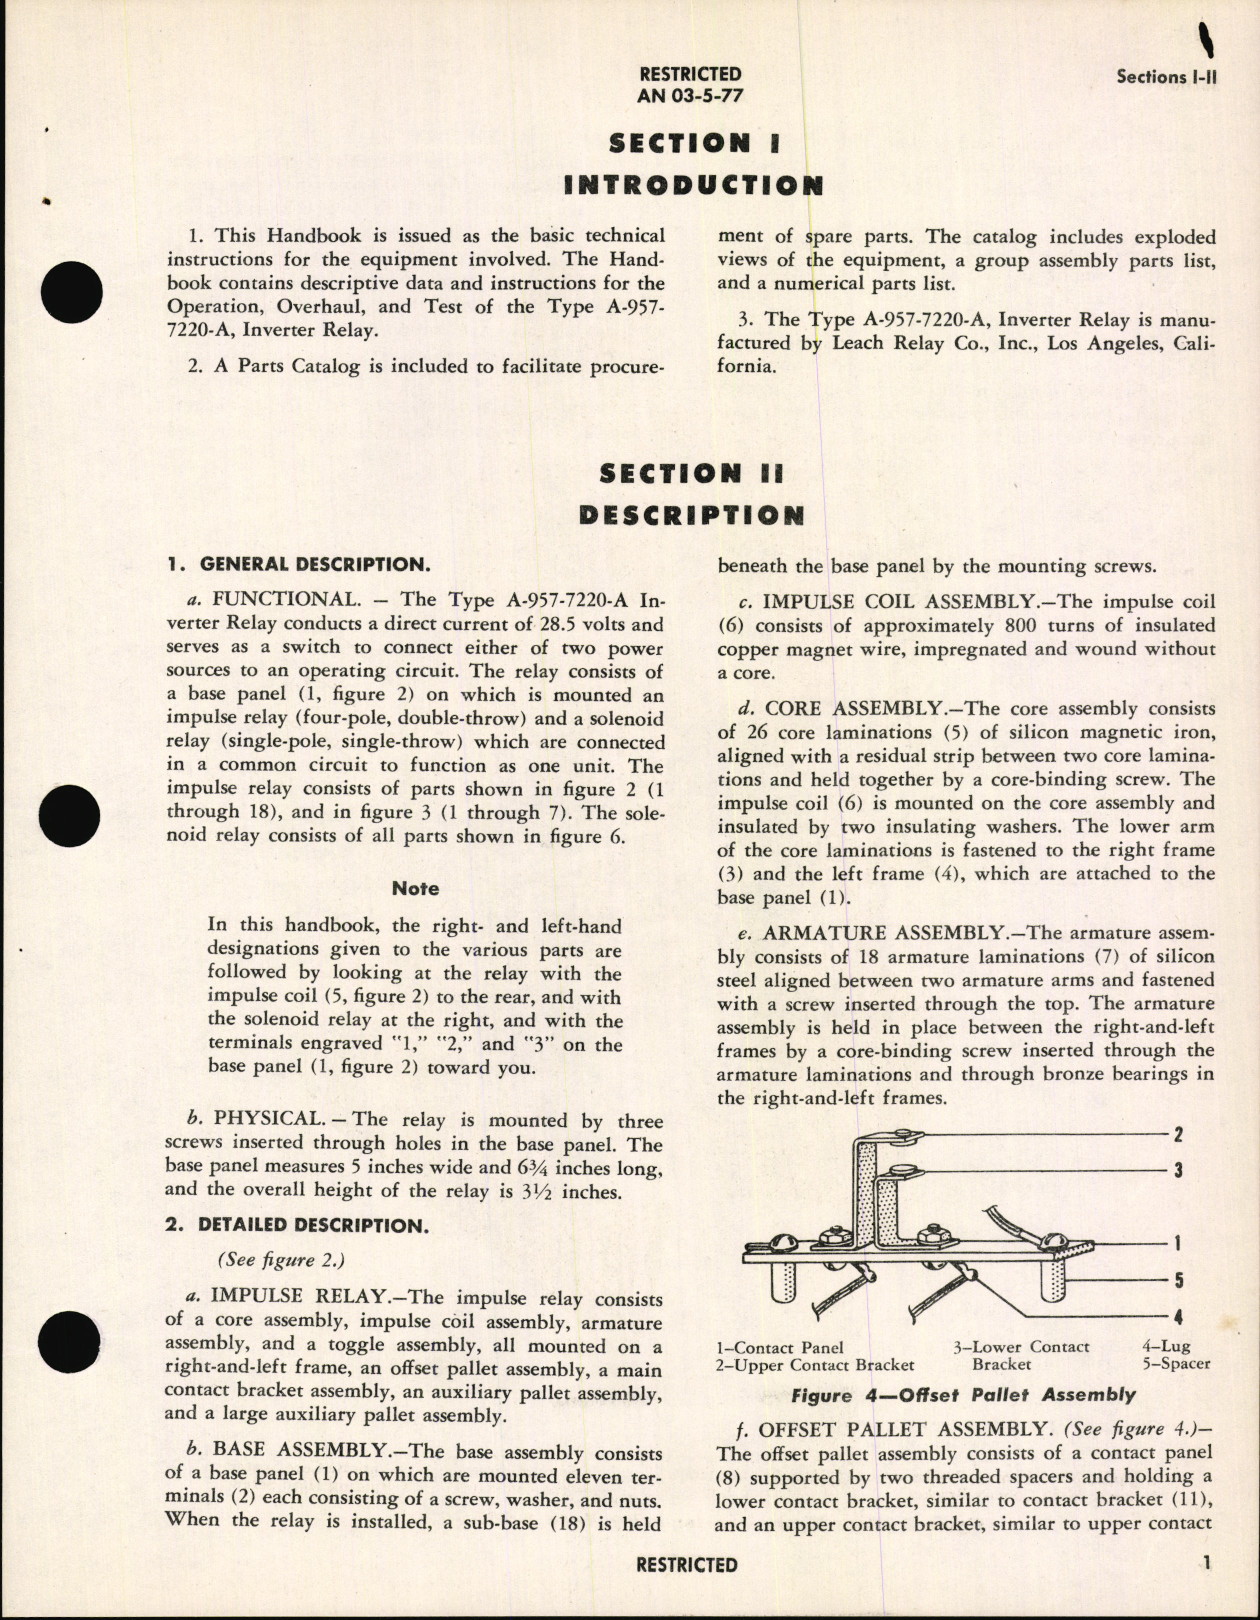 Sample page 7 from AirCorps Library document: Overhaul Instructions with Parts Catalog for Inverter Relay A-957-7220-A